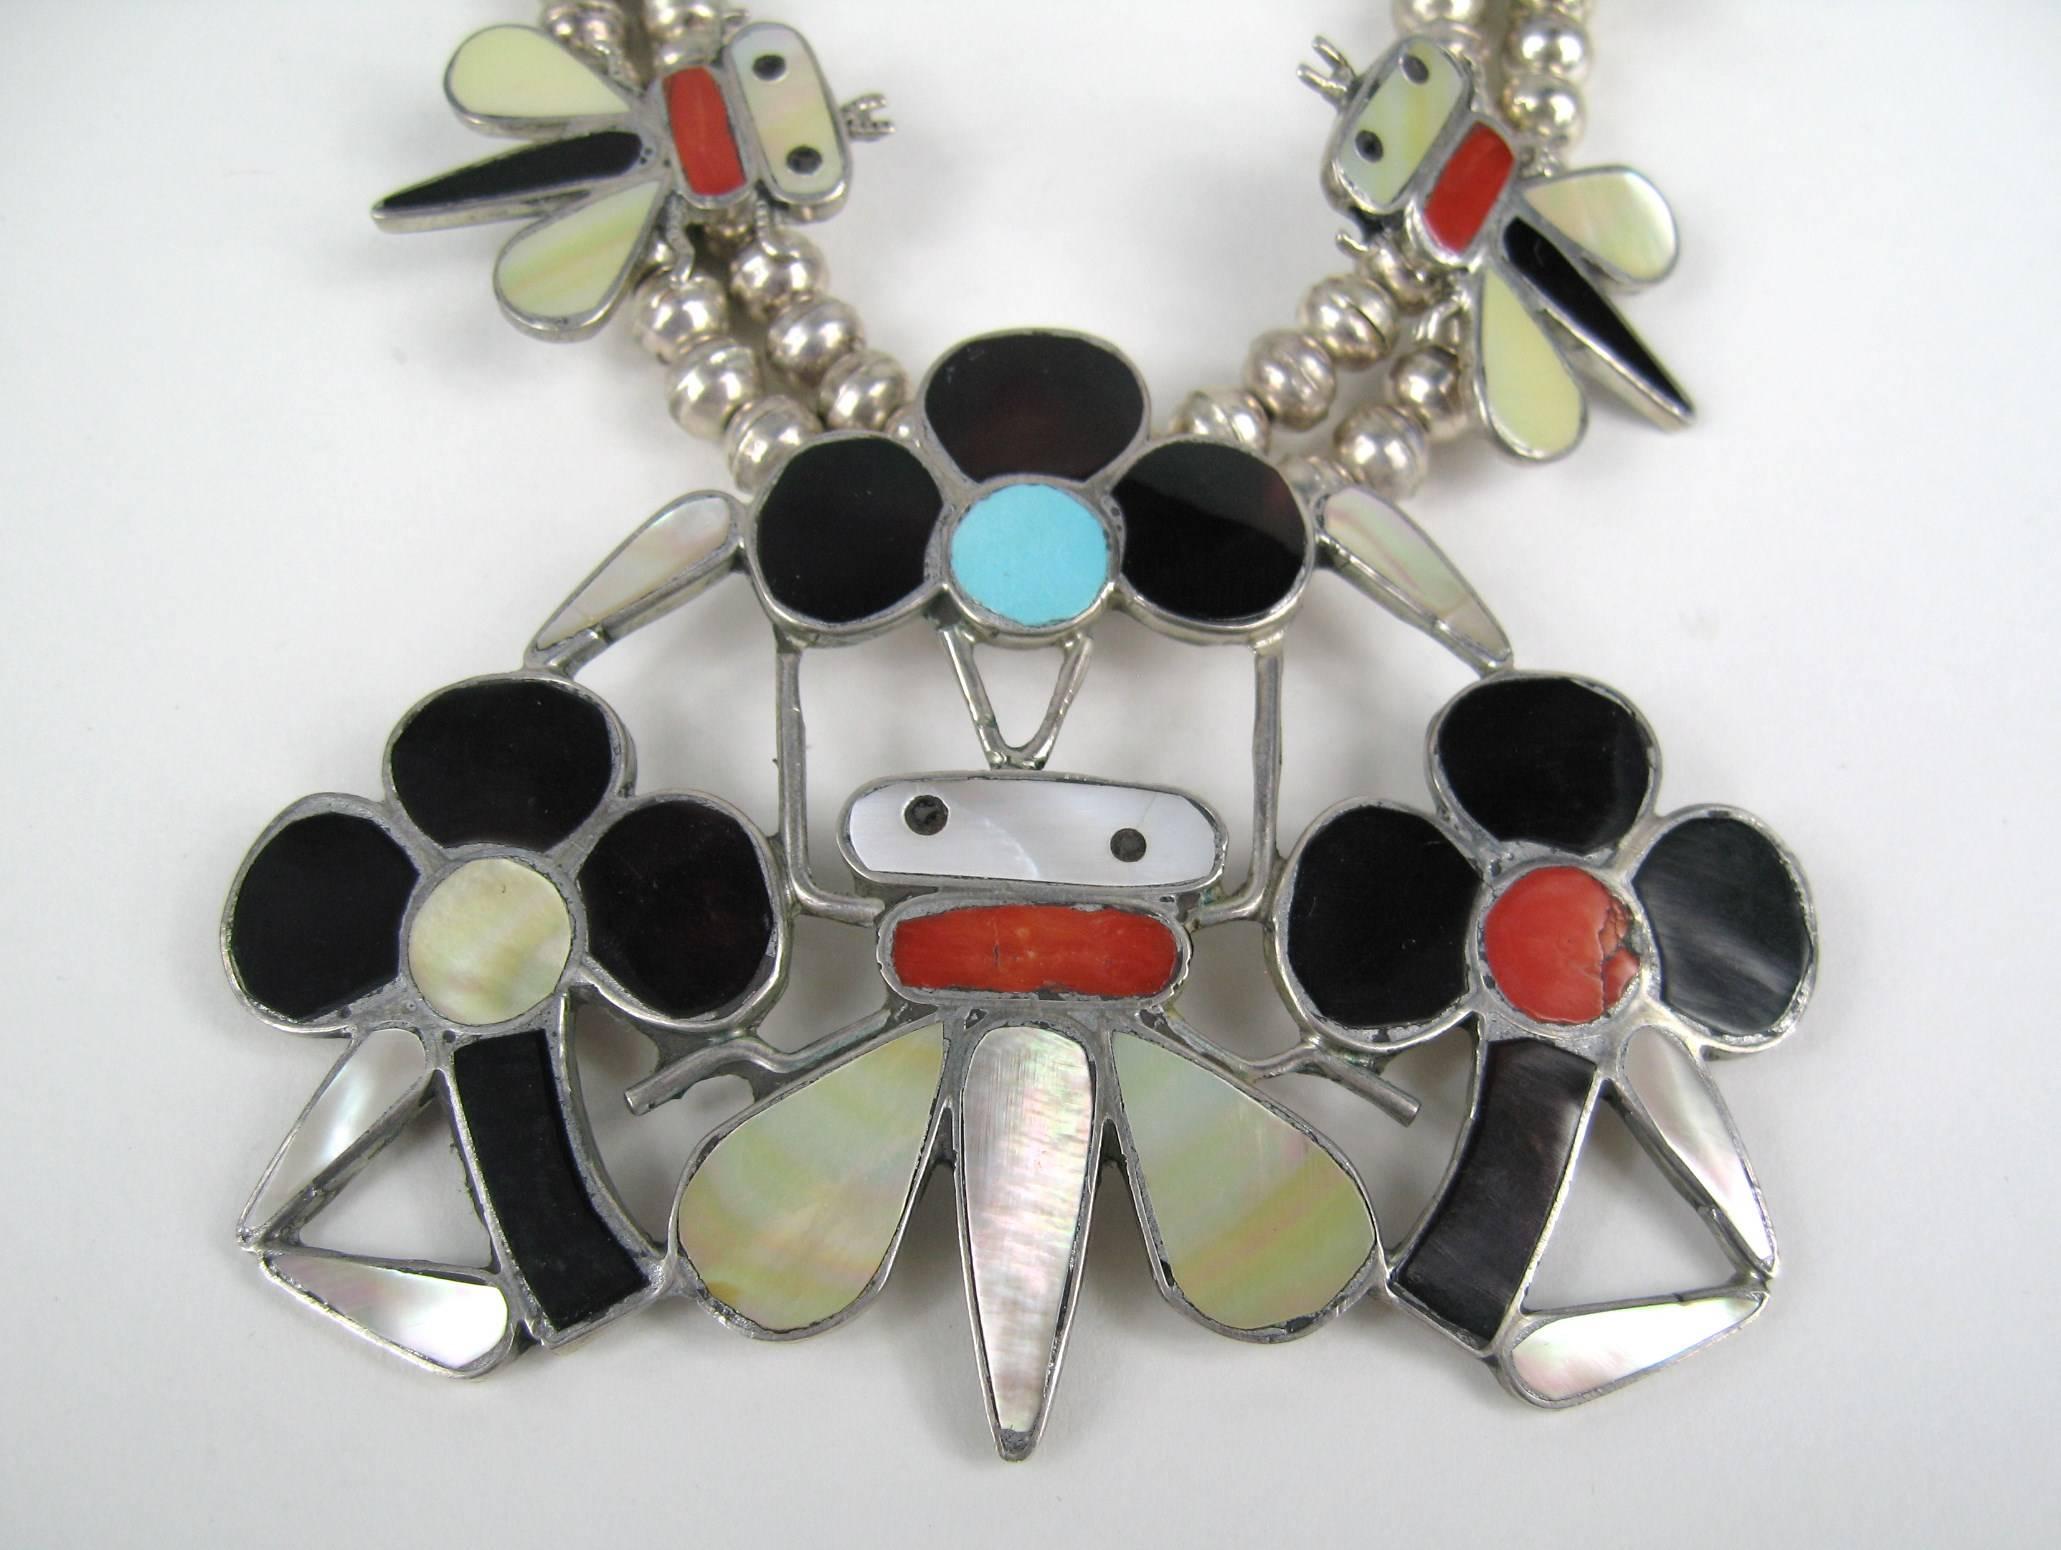 TANNER CHANEY - Zuni artist Sensa Eustace created this circa 1970's sterling silver and channel inlay honey bee squash blossom necklace set.  Zuni artist Sensa Eustace created this circa 1970's sterling silver and channel inlay honey bee squash